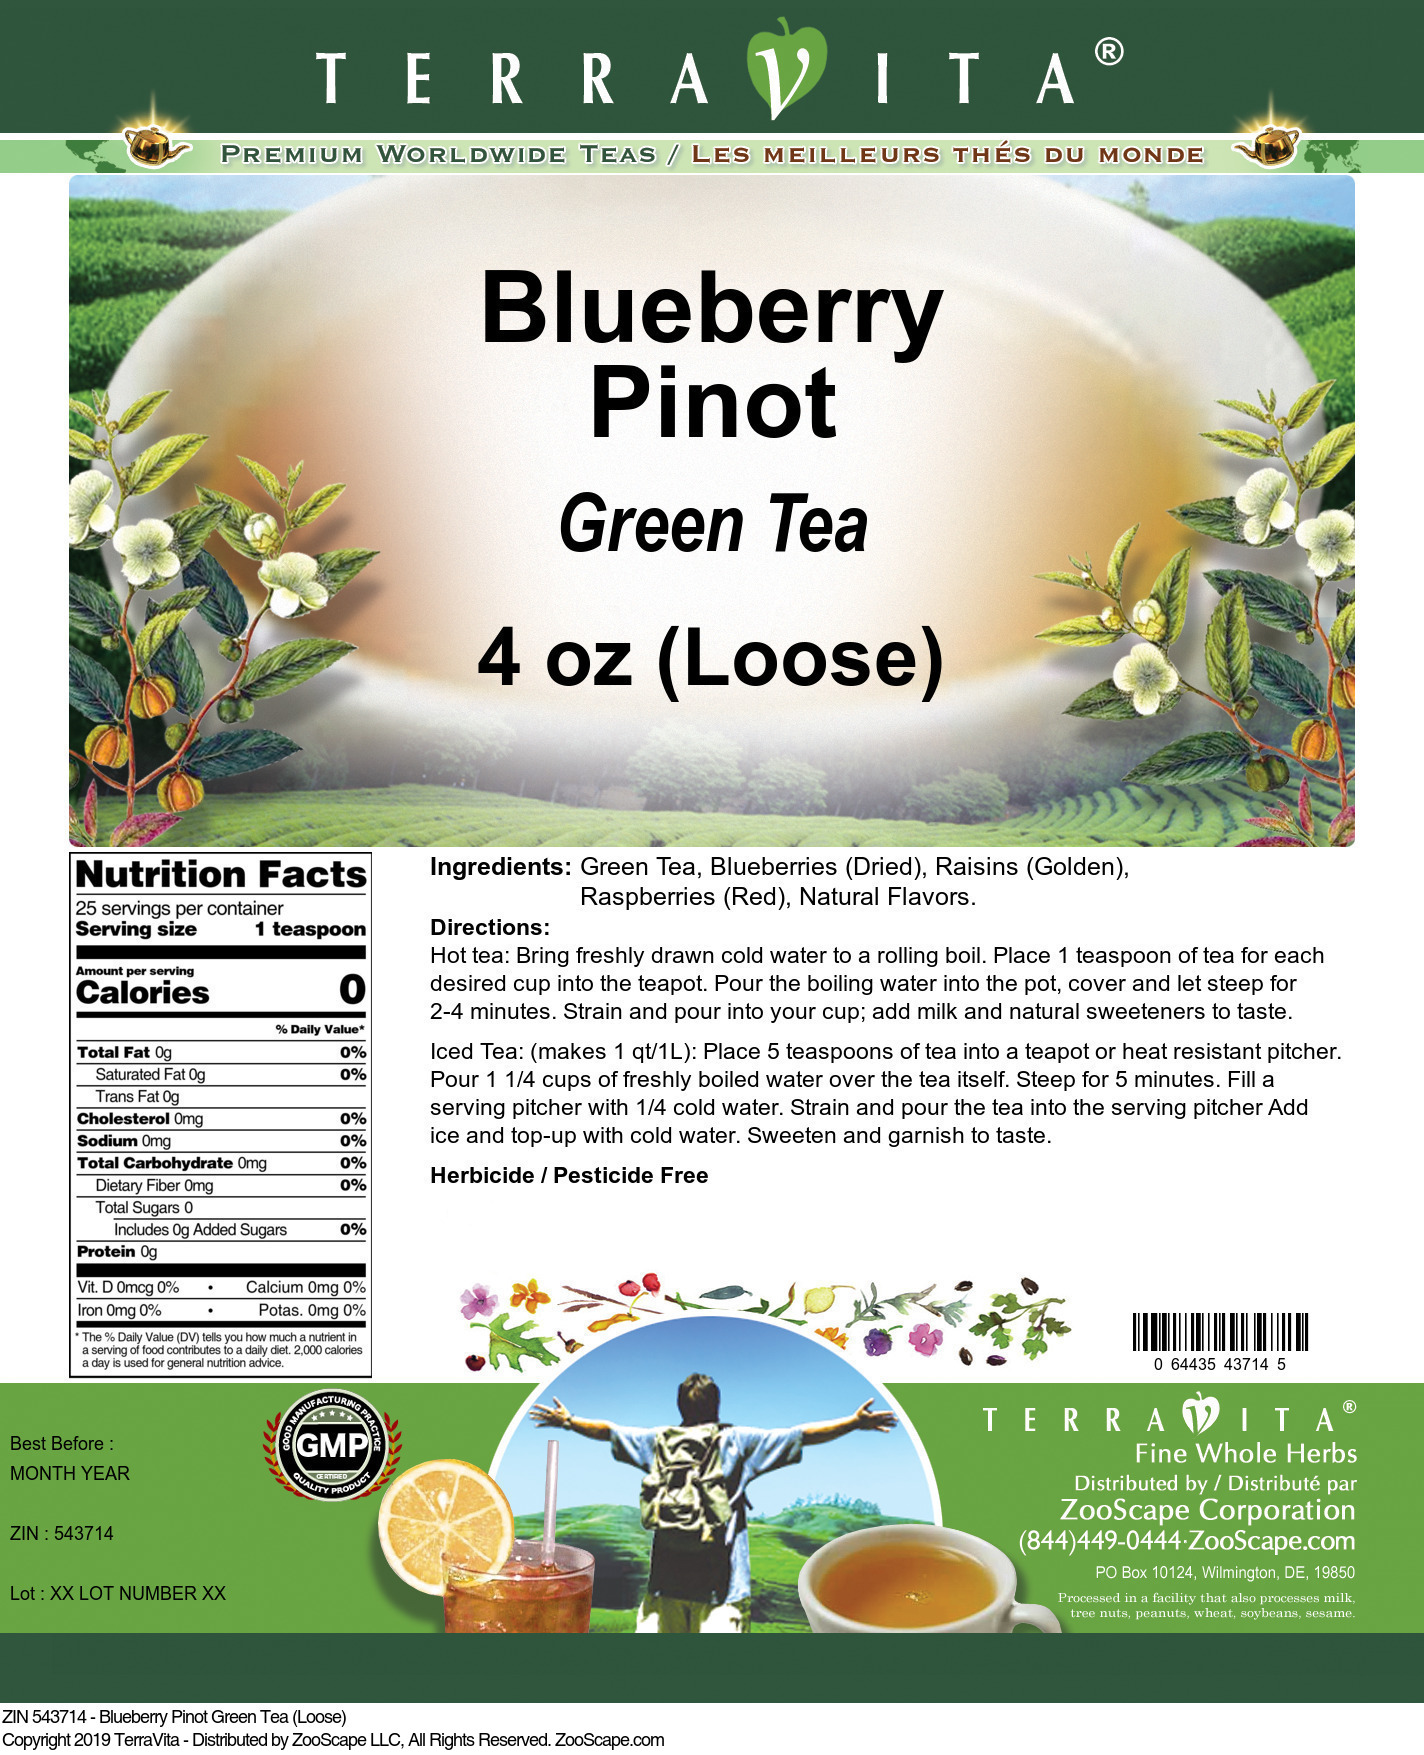 Blueberry Pinot Green Tea (Loose) - Label